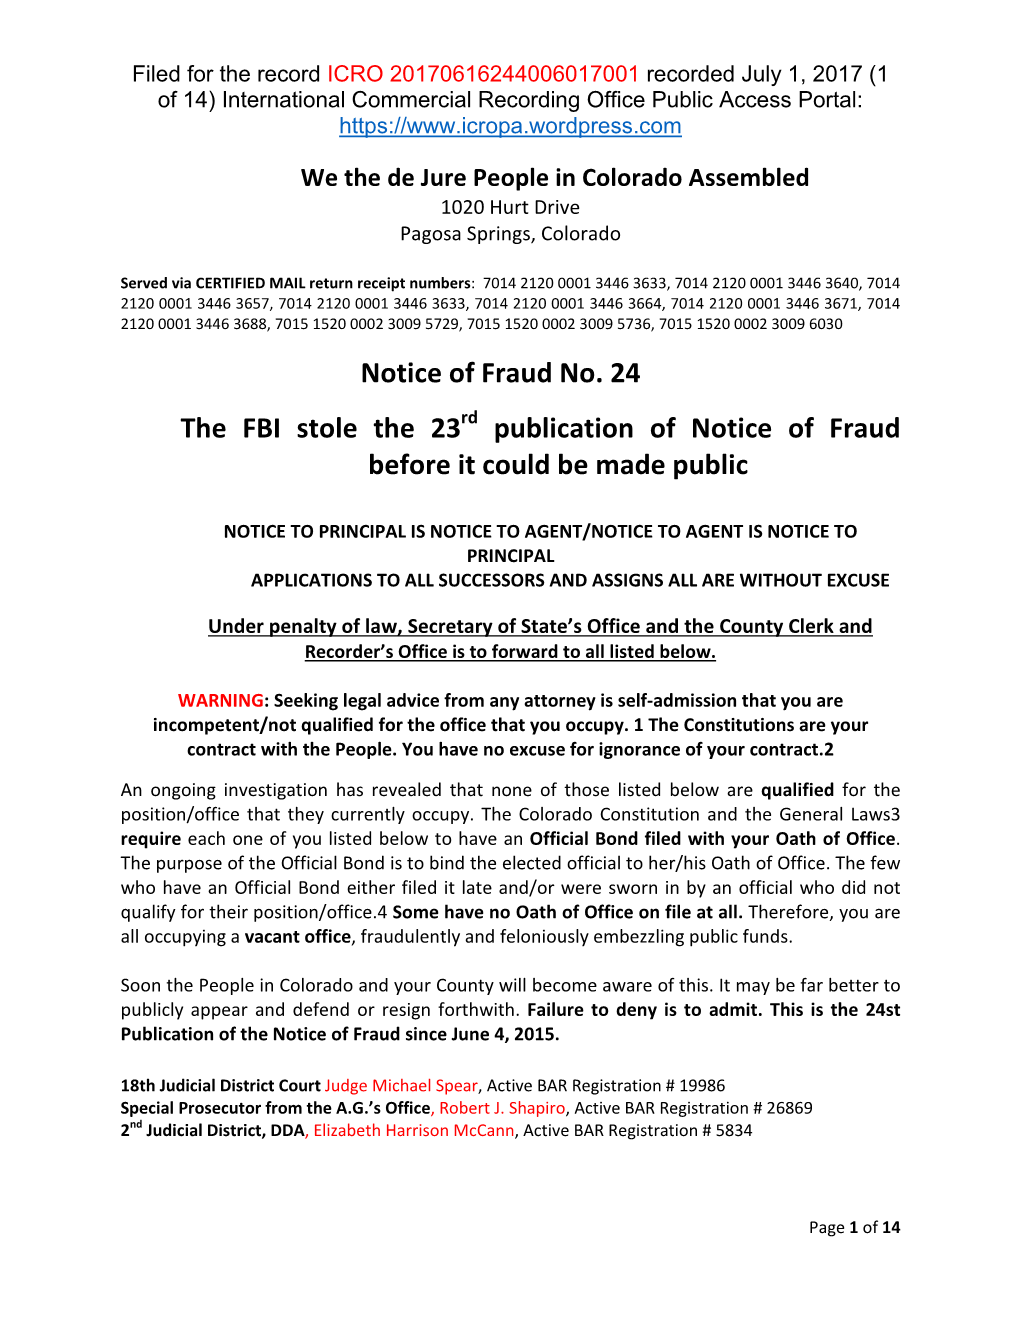 Notice of Fraud No. 24 the FBI Stole the 23Rd Publication of Notice of Fraud Before It Could Be Made Public